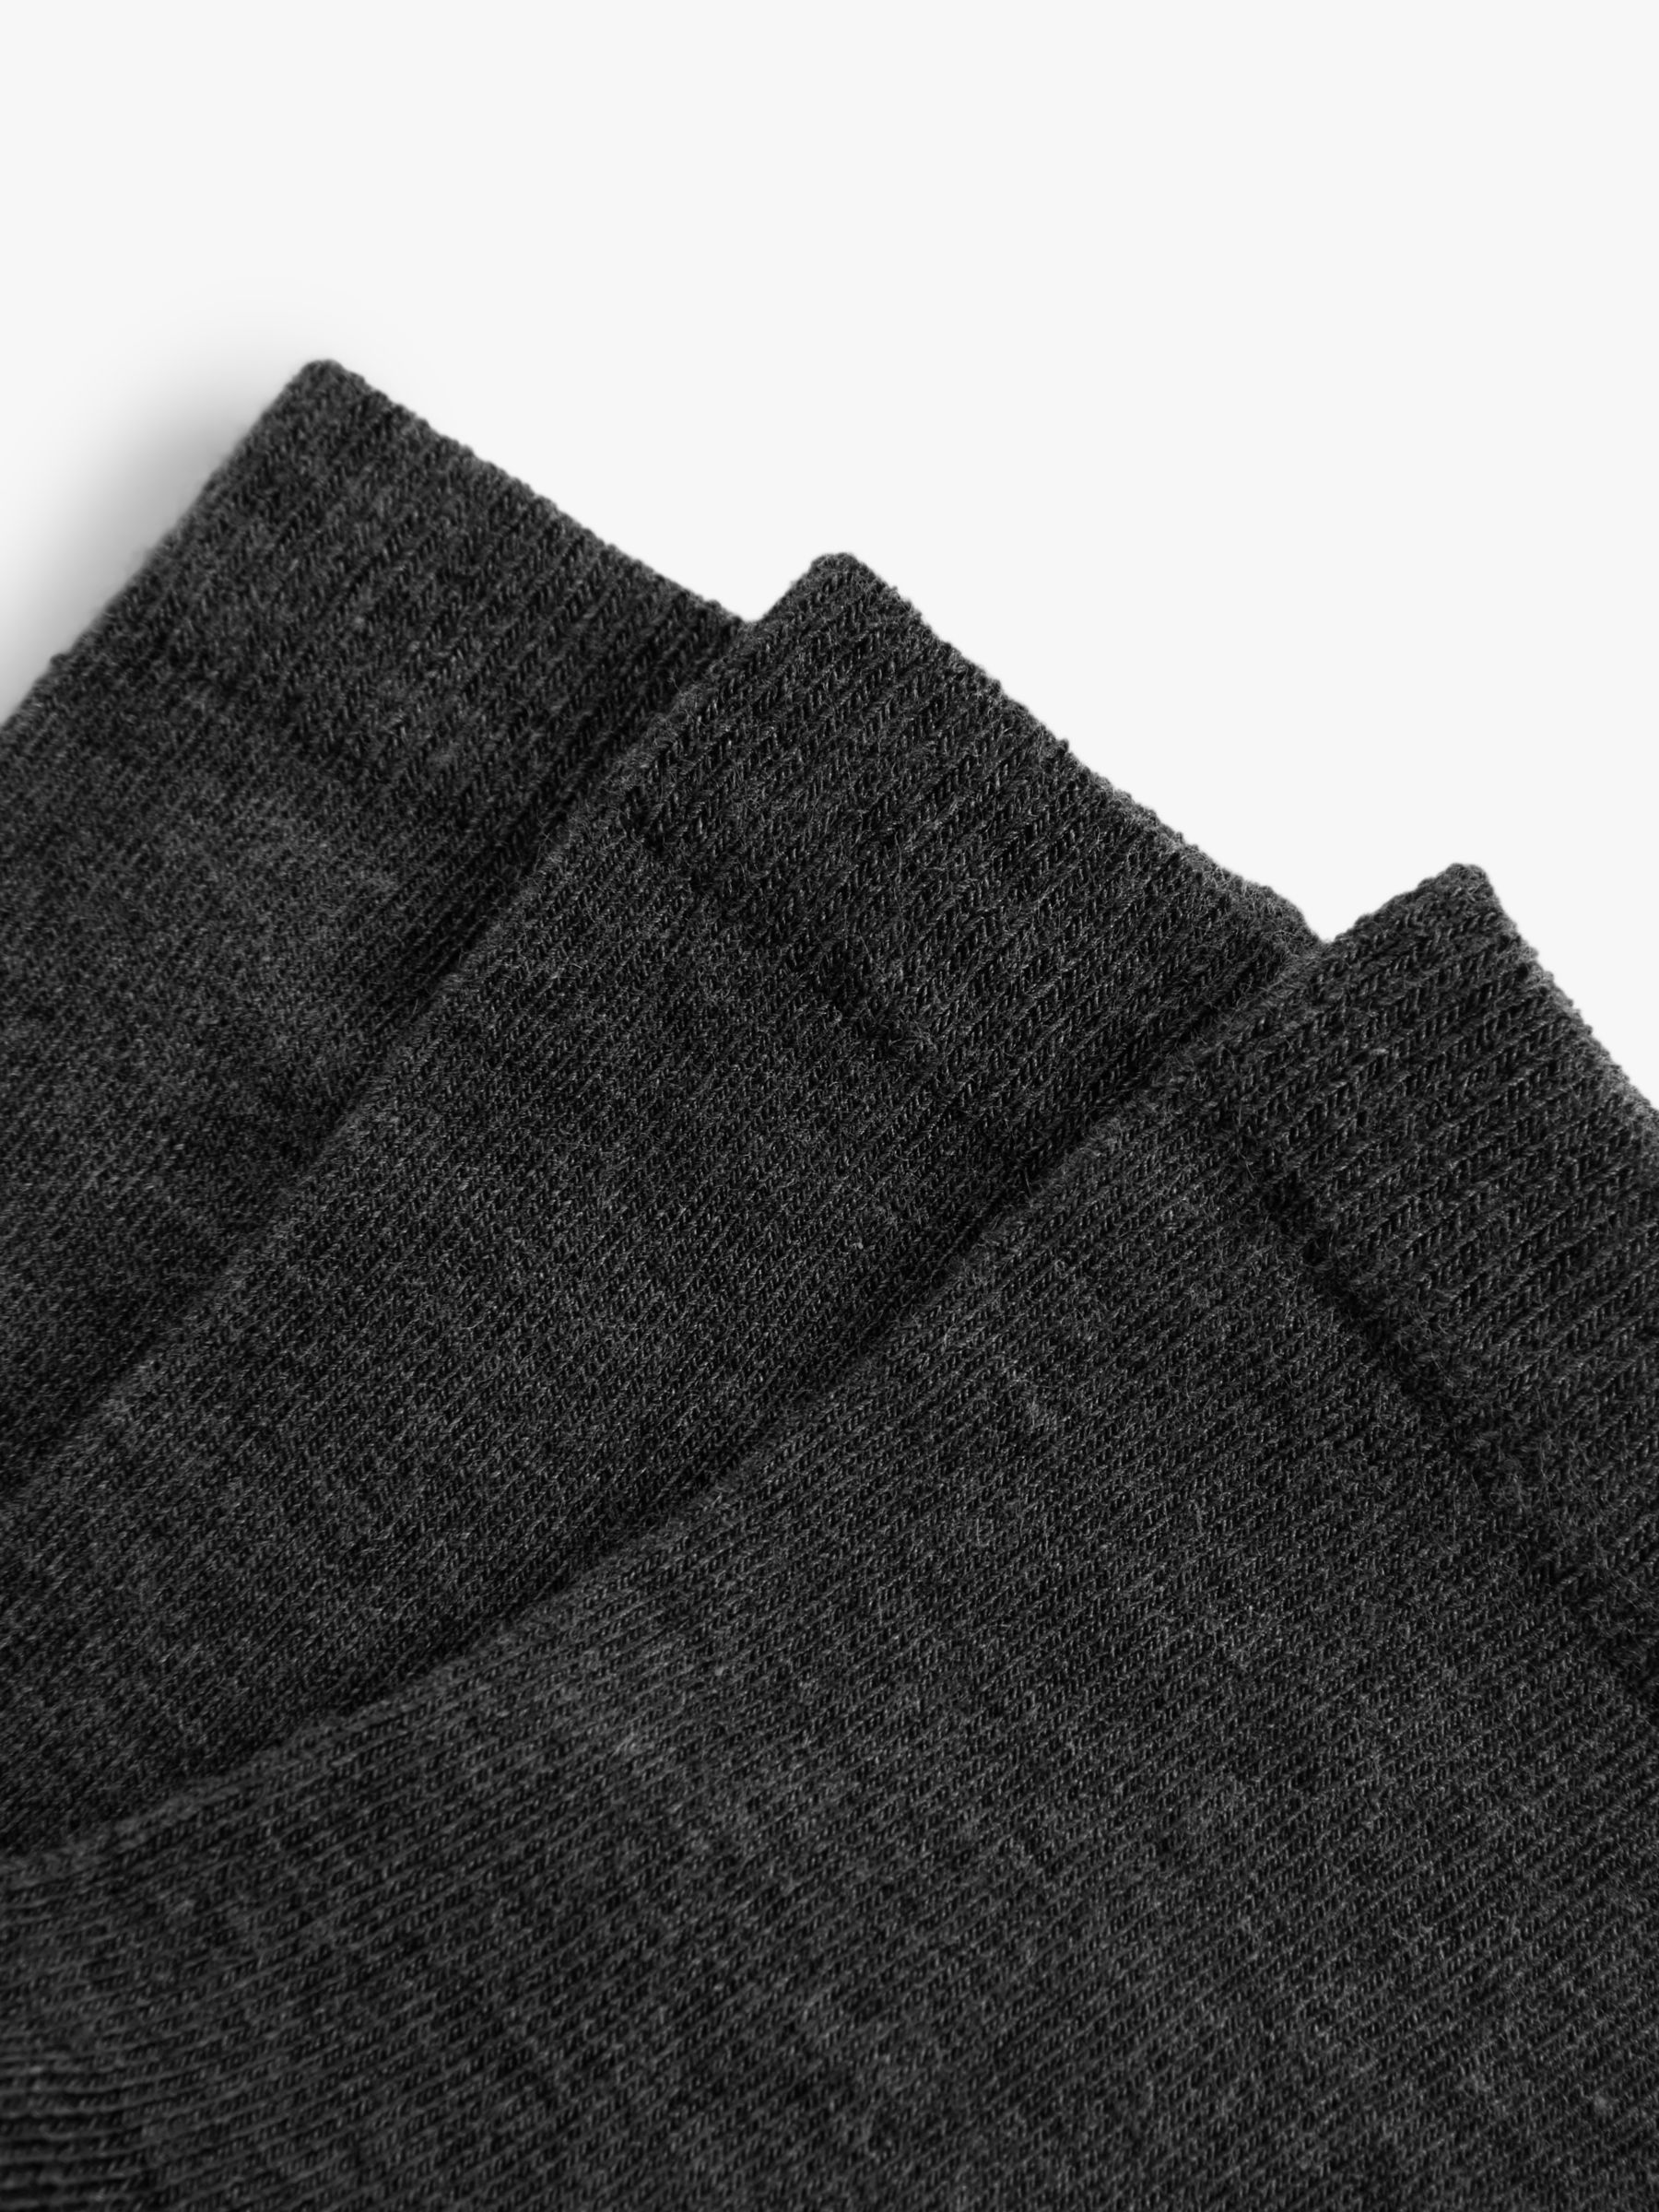 John Lewis Kids' Supersoft Thermal Ankle Socks, Pack of 3, Charcoal, 4-7